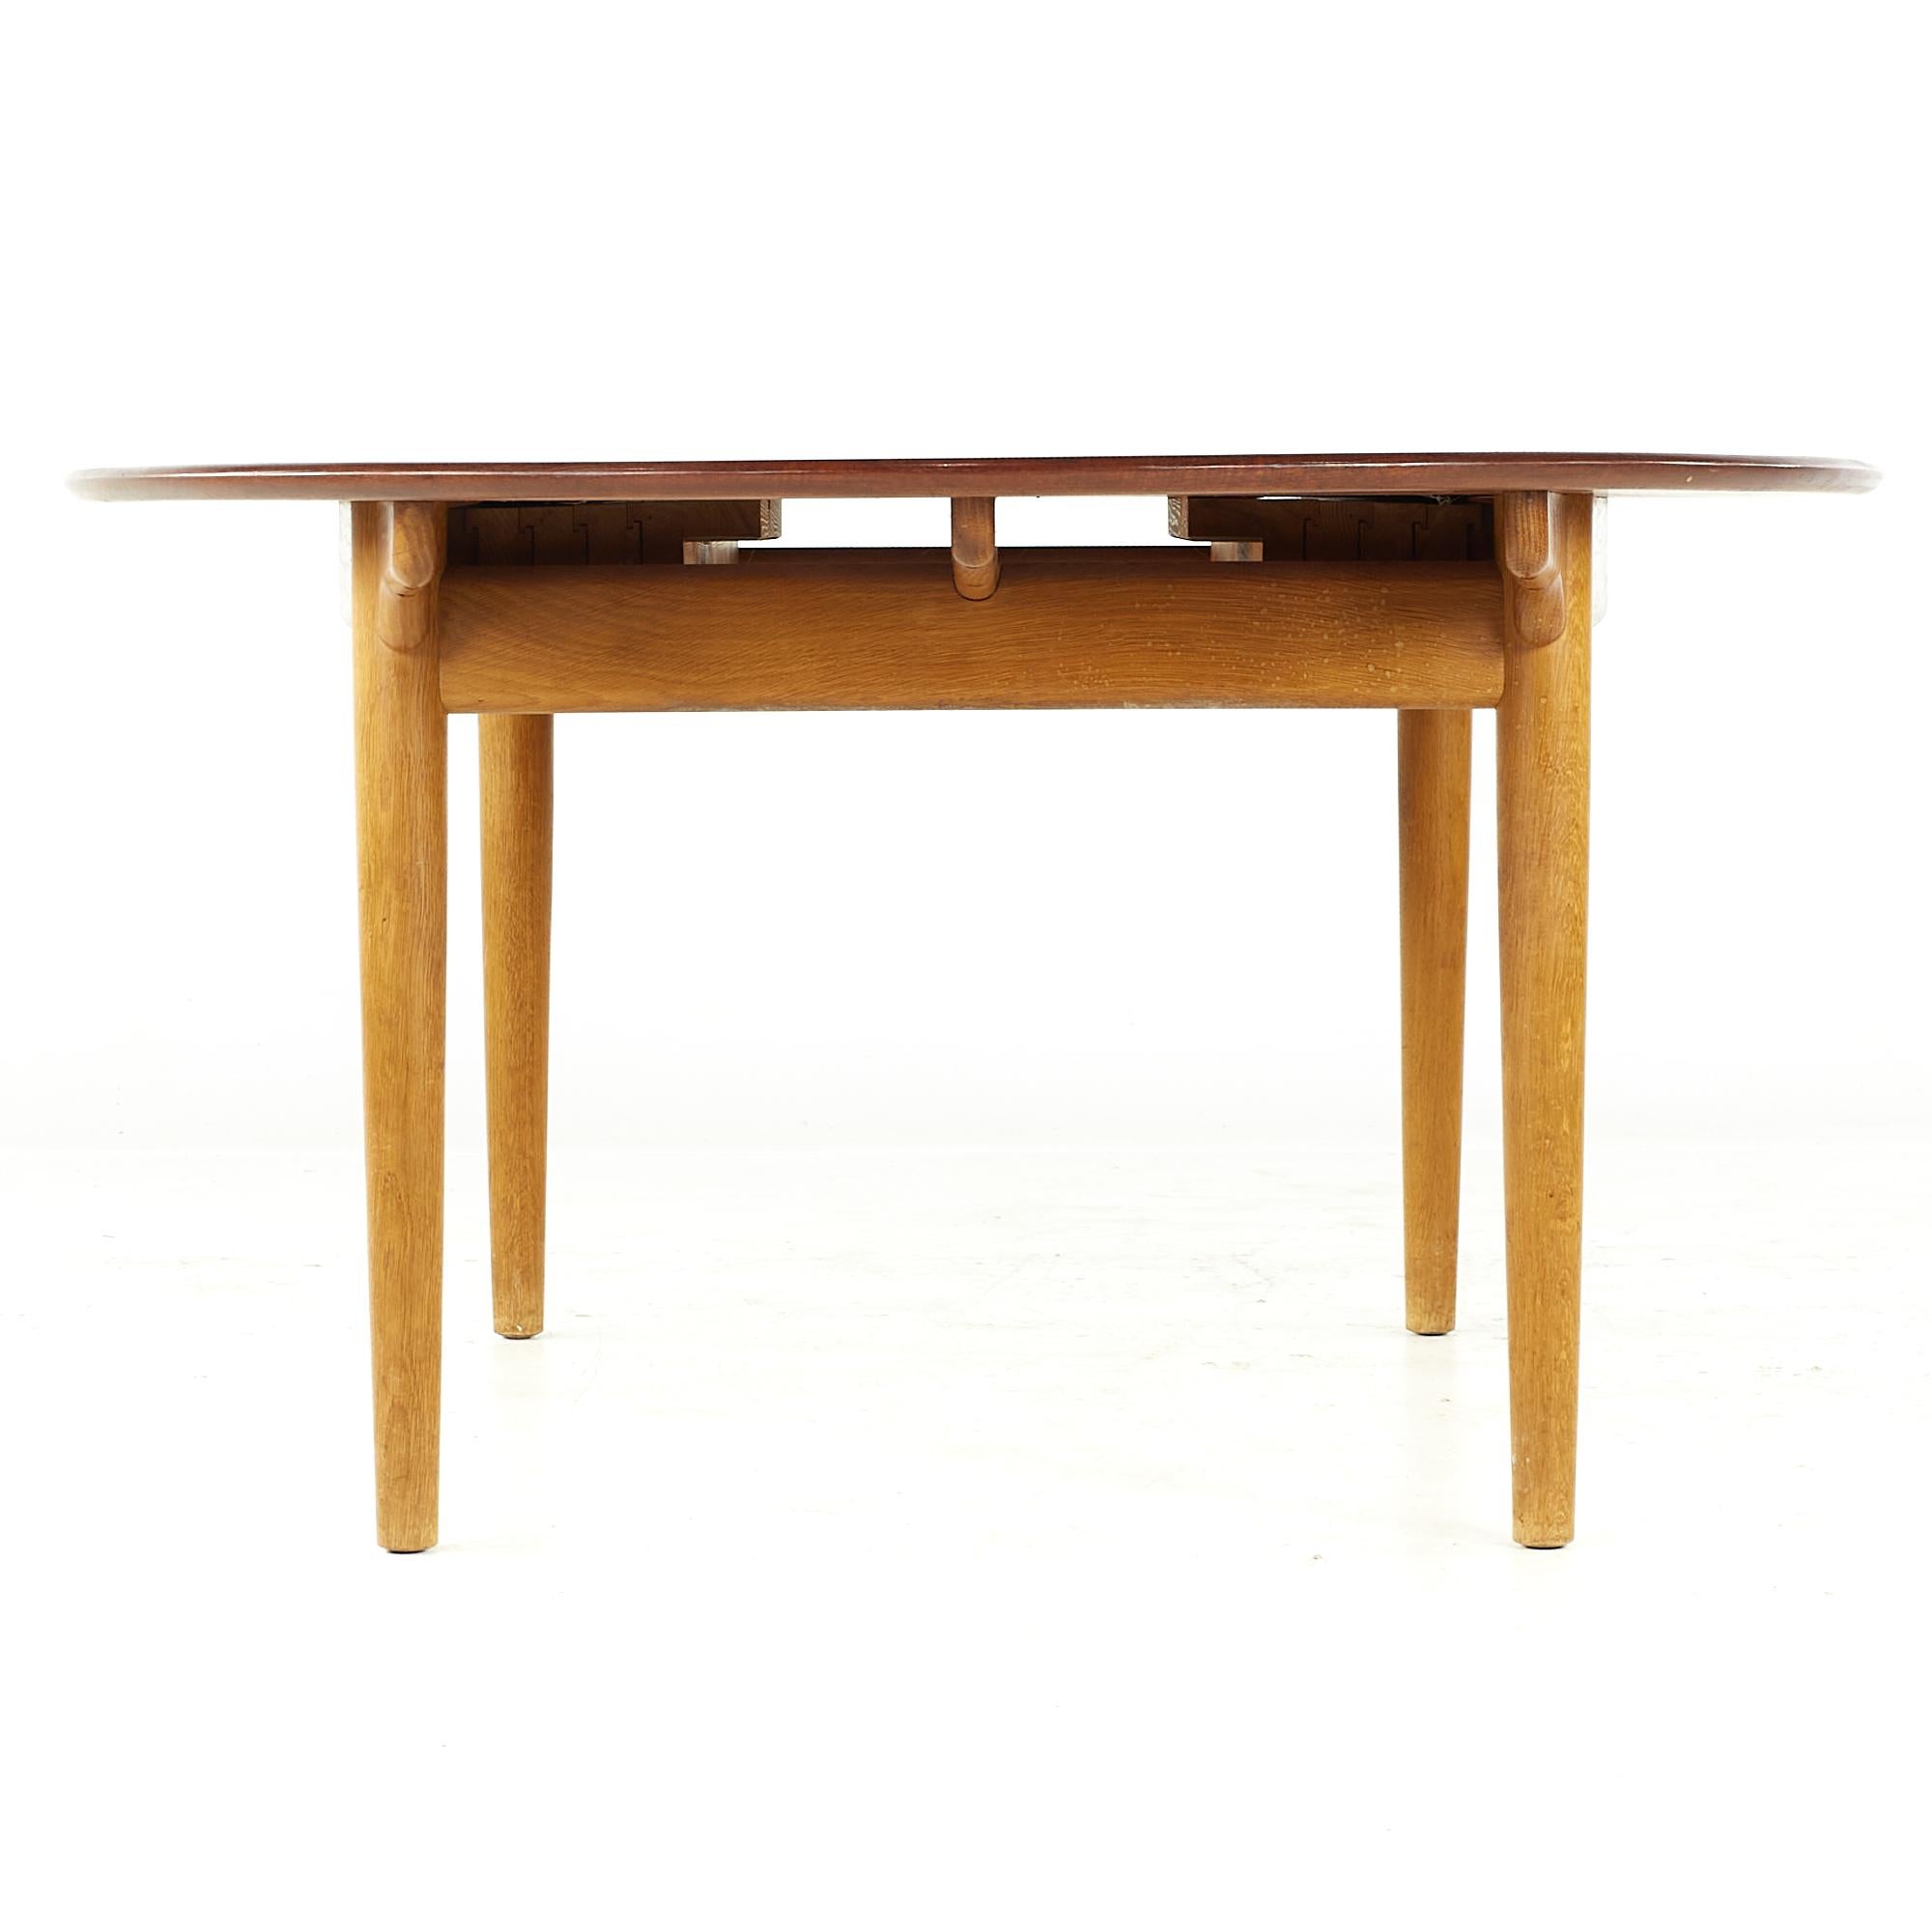 Early Original Hans Wegner Johannes Hansen MCM Model Jh0567 Teak Dining Table In Good Condition For Sale In Countryside, IL